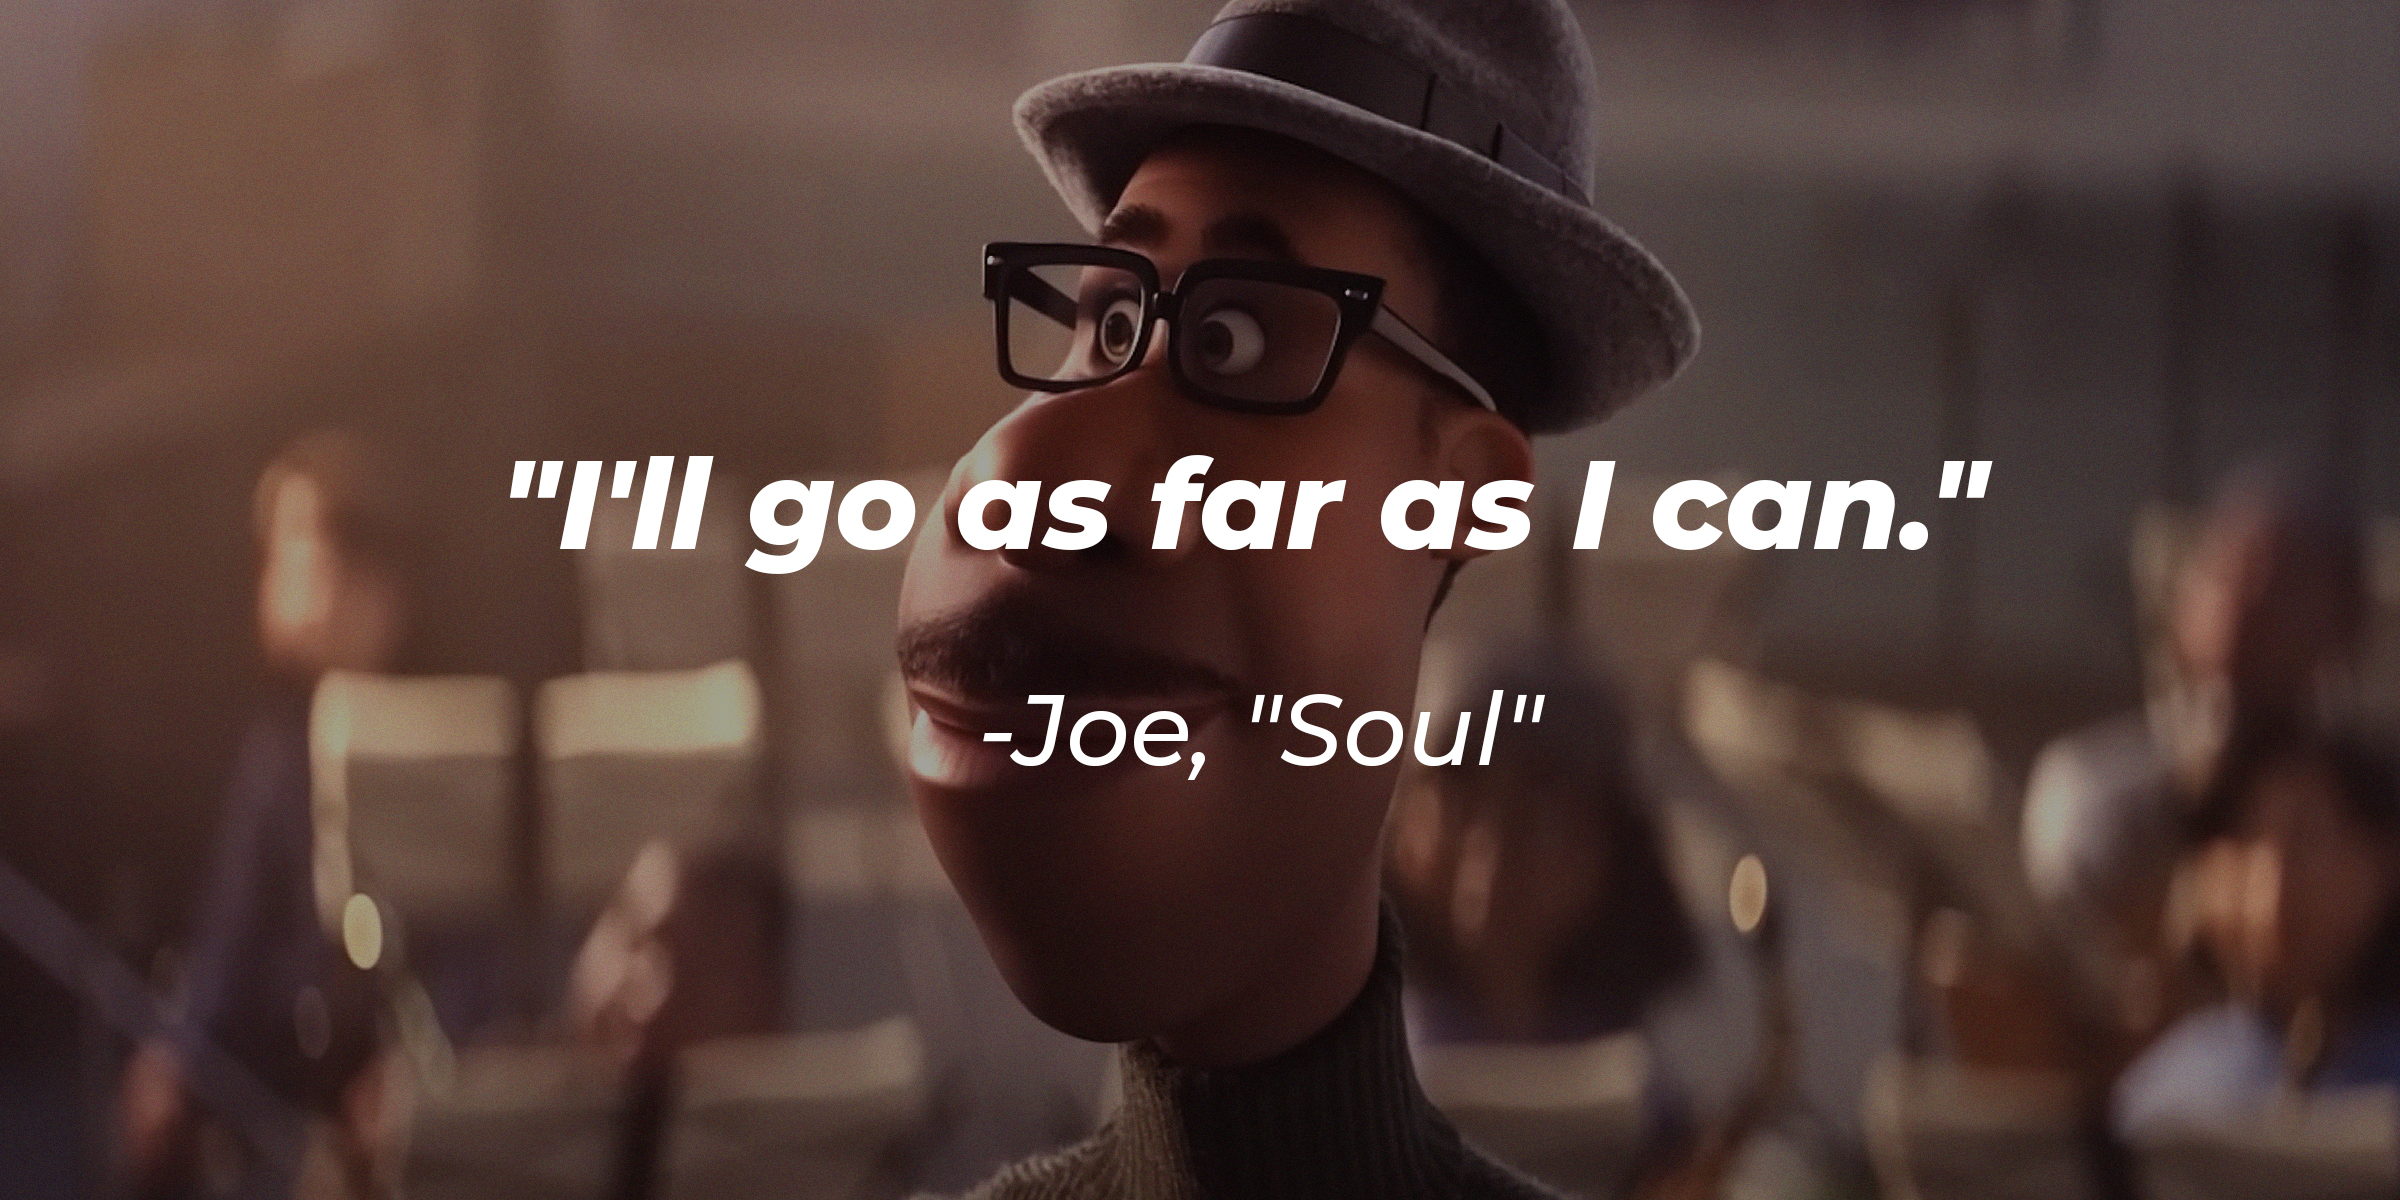 A photo of Joe from the movie "Soule" the quote, "I'll go as far as I can." | Source: youtube.com/pixar